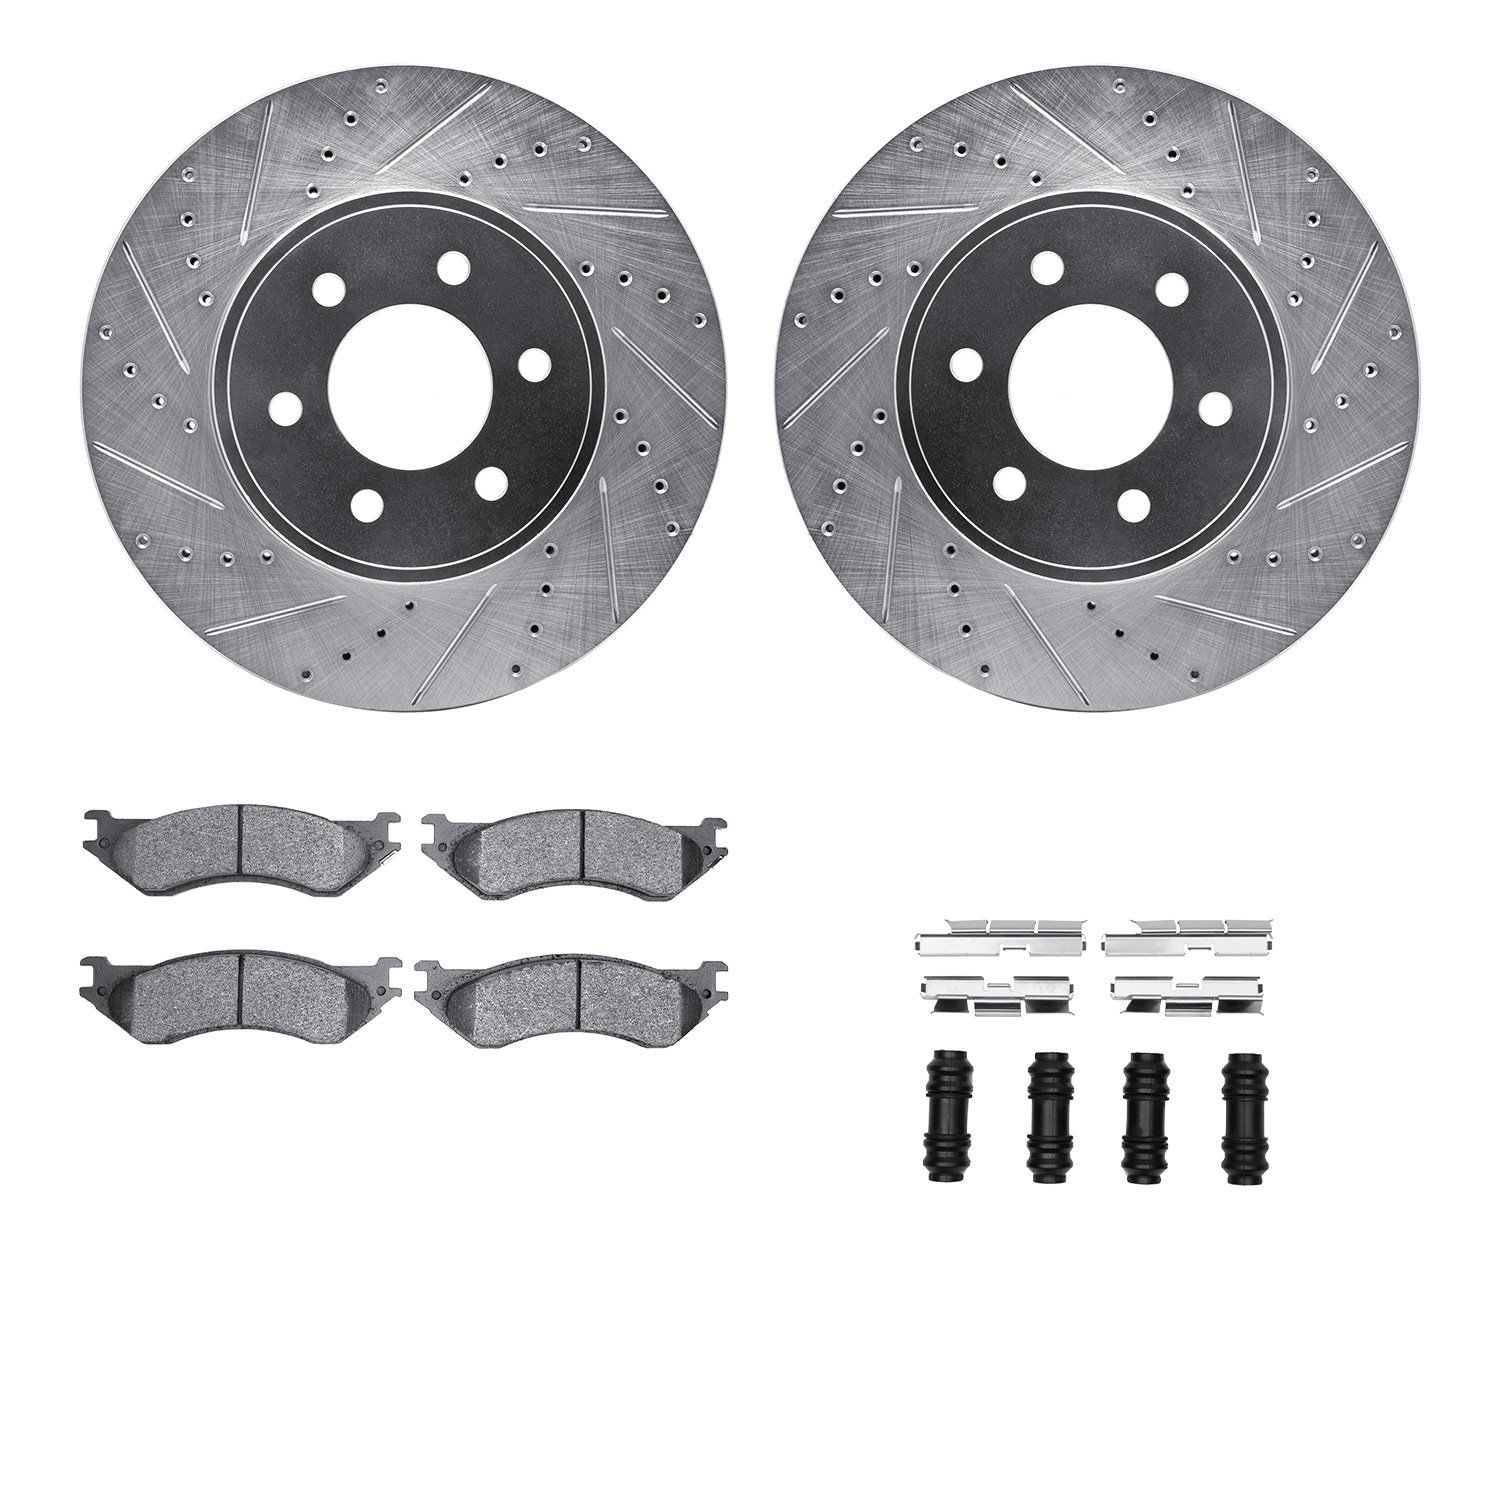 7412-40014 Drilled/Slotted Brake Rotors with Ultimate-Duty Brake Pads Kit & Hardware [Silver], 2003-2003 Mopar, Position: Front